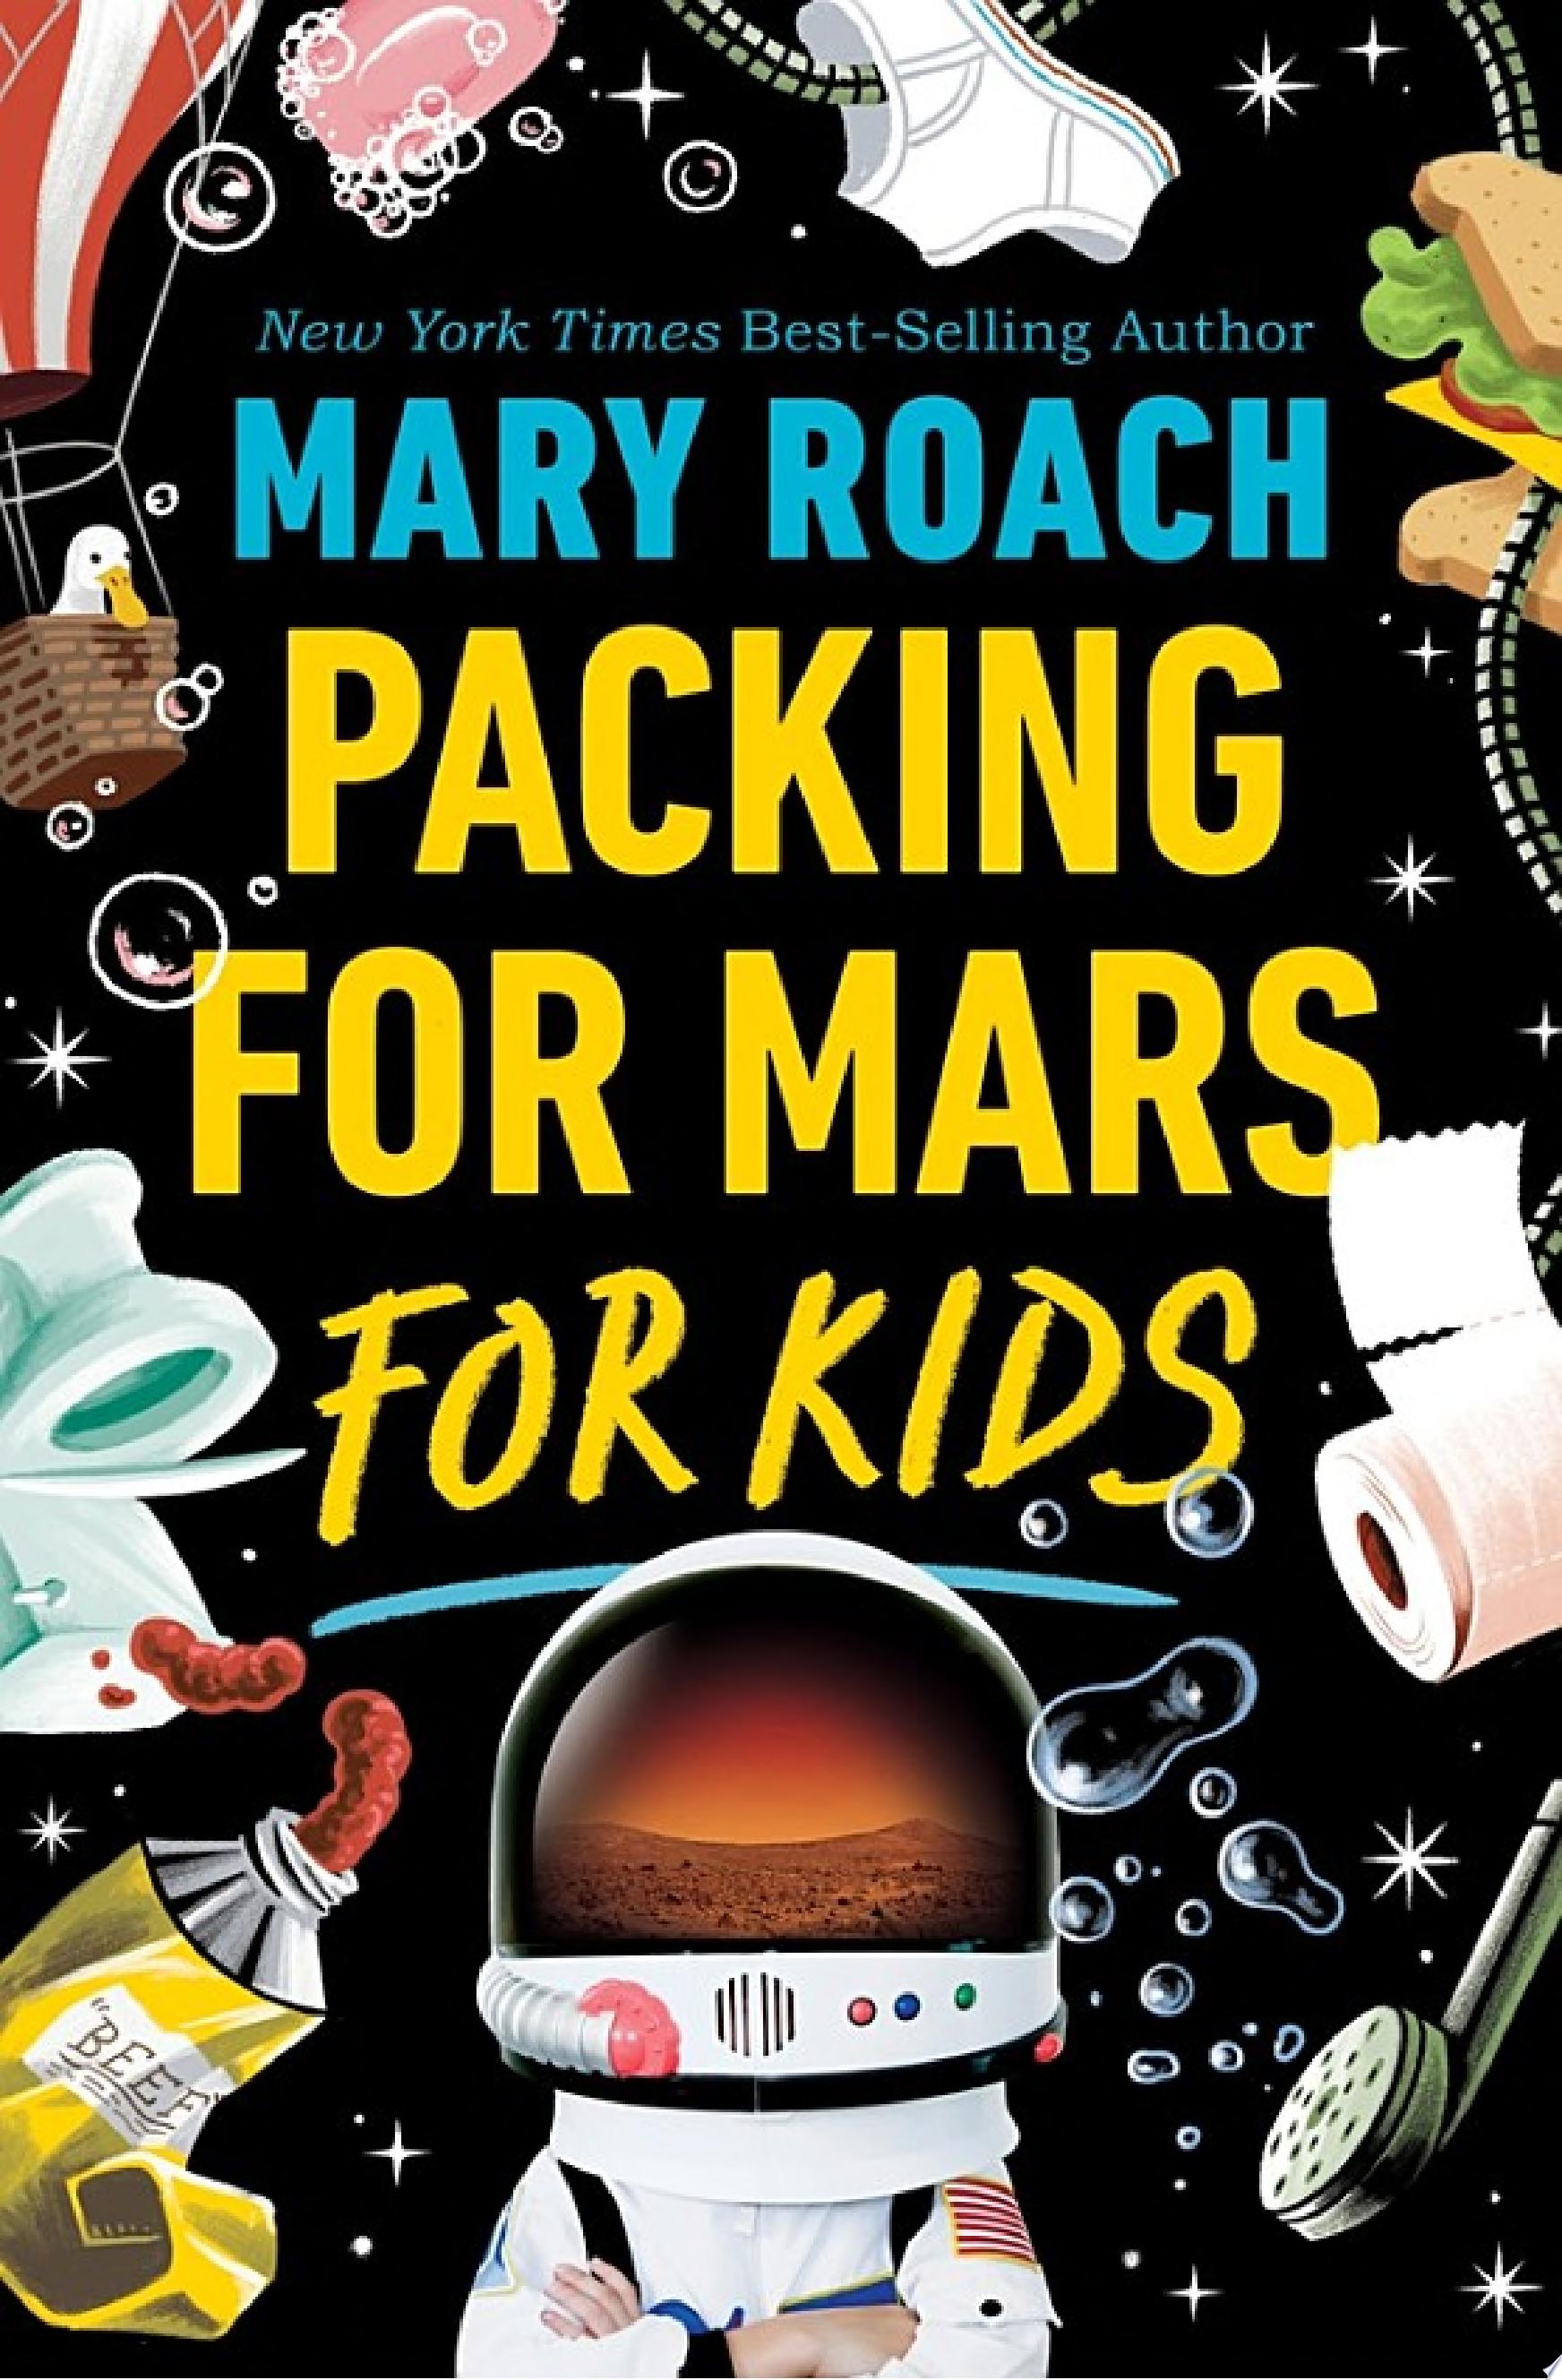 Image for "Packing for Mars for Kids"